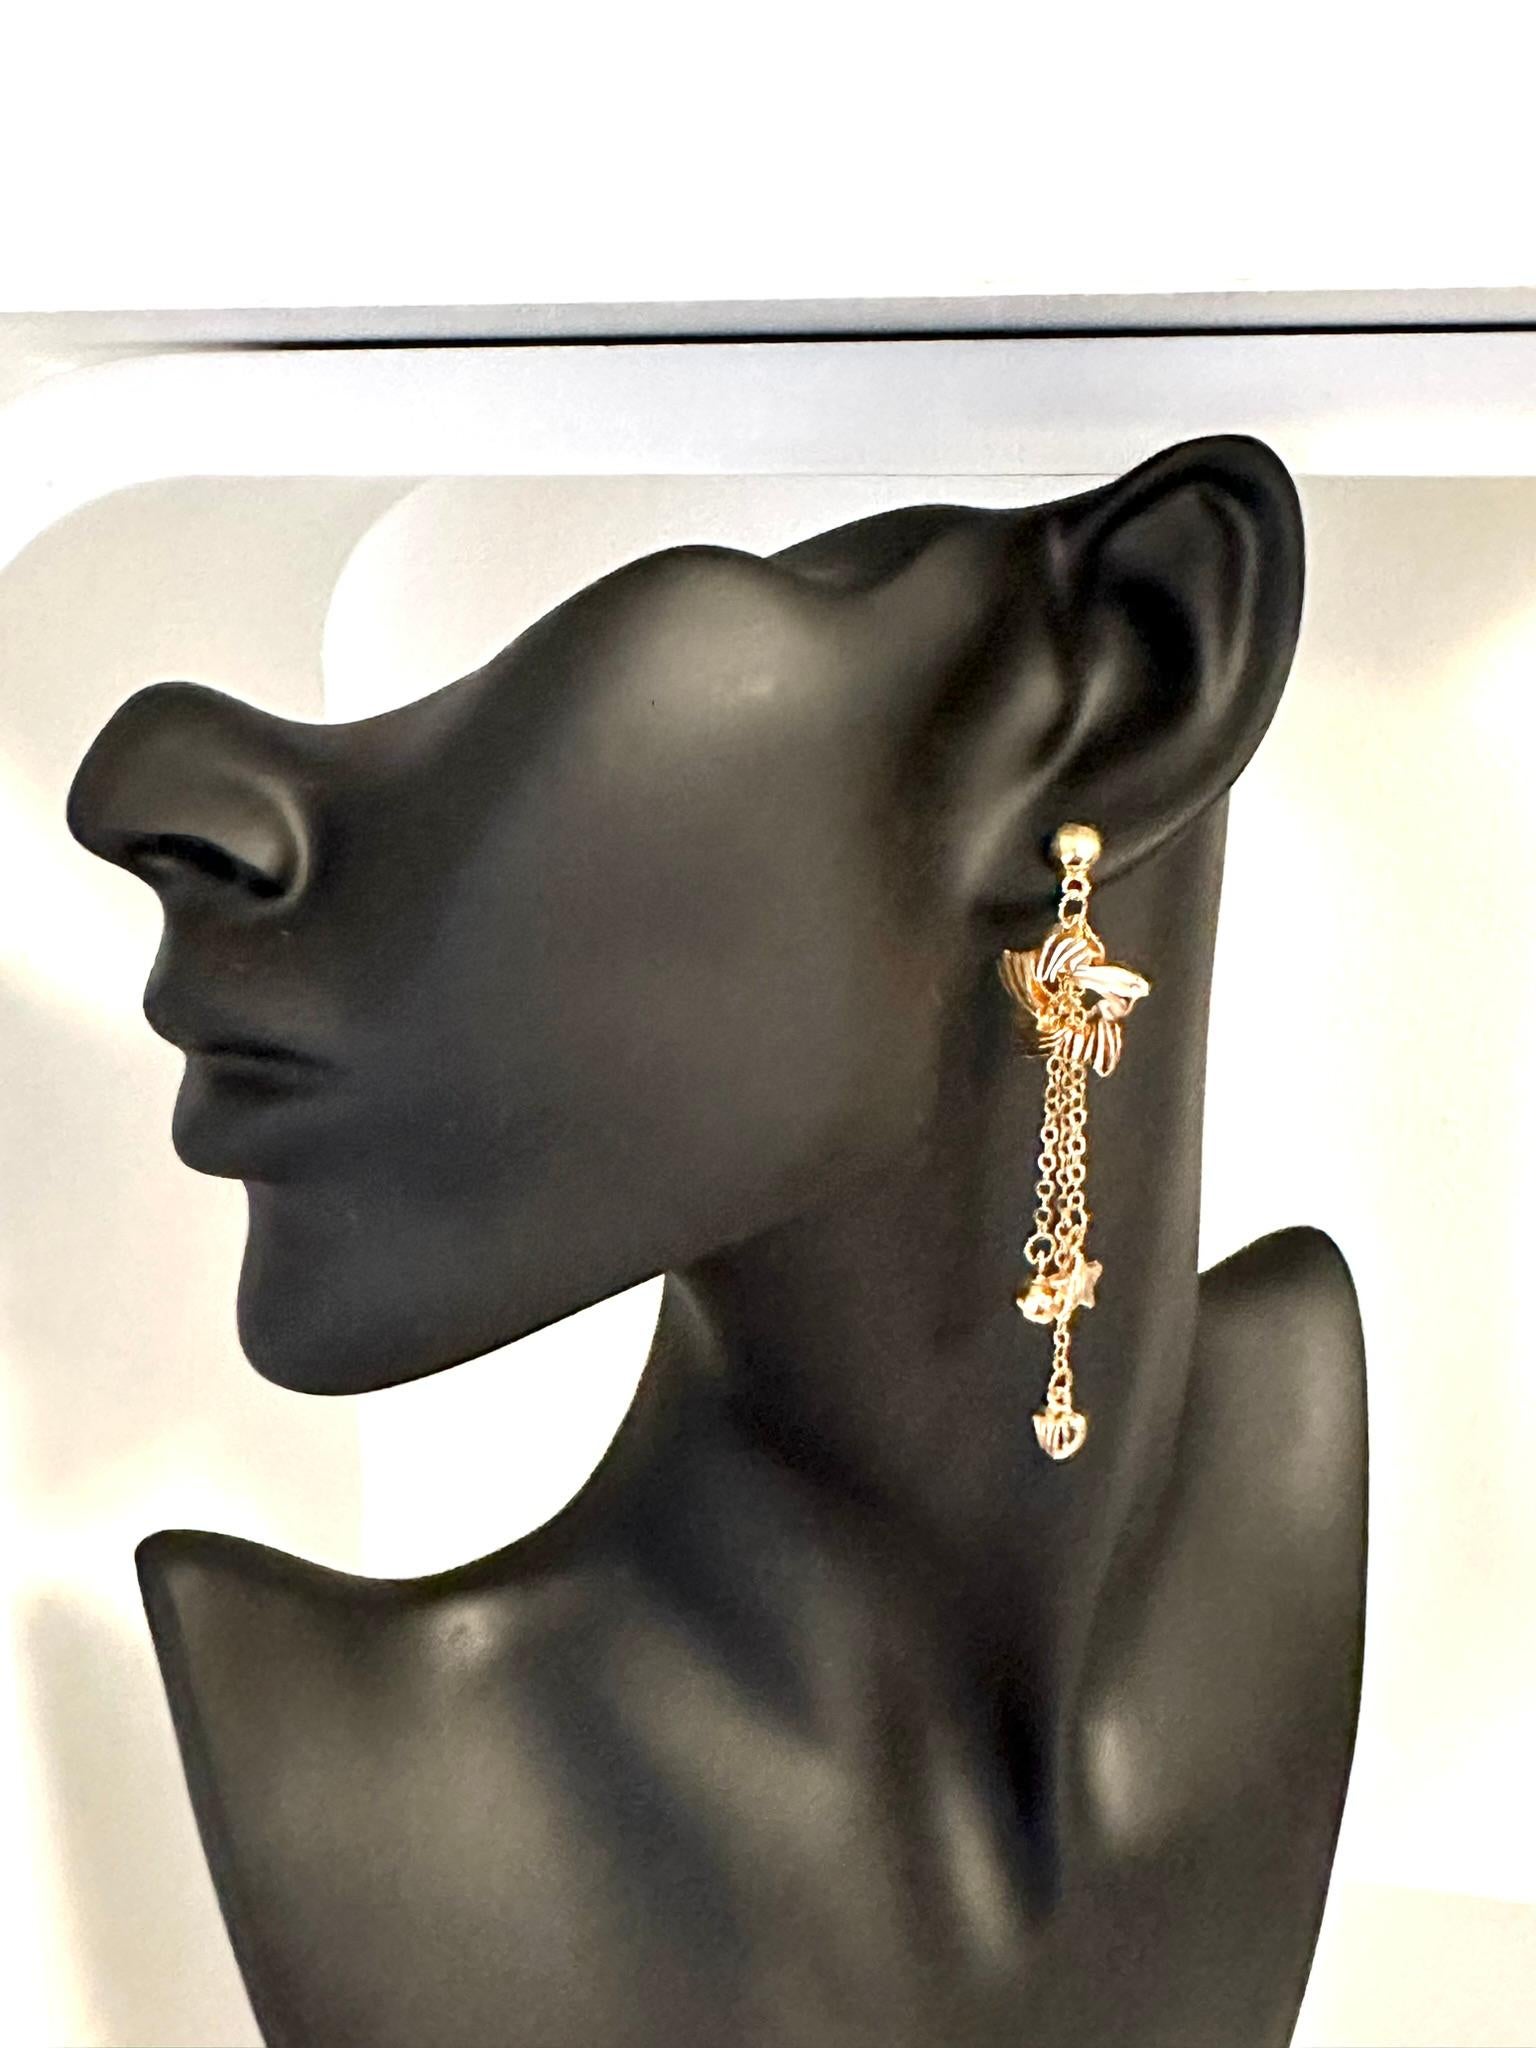 These Yellow Gold Dangle Star-Shaped Earrings are a celestial delight, radiating beauty and elegance. Crafted from stunning 21kt yellow gold, these earrings possess a rich and luxurious hue that adds warmth and sophistication to any ensemble.

The